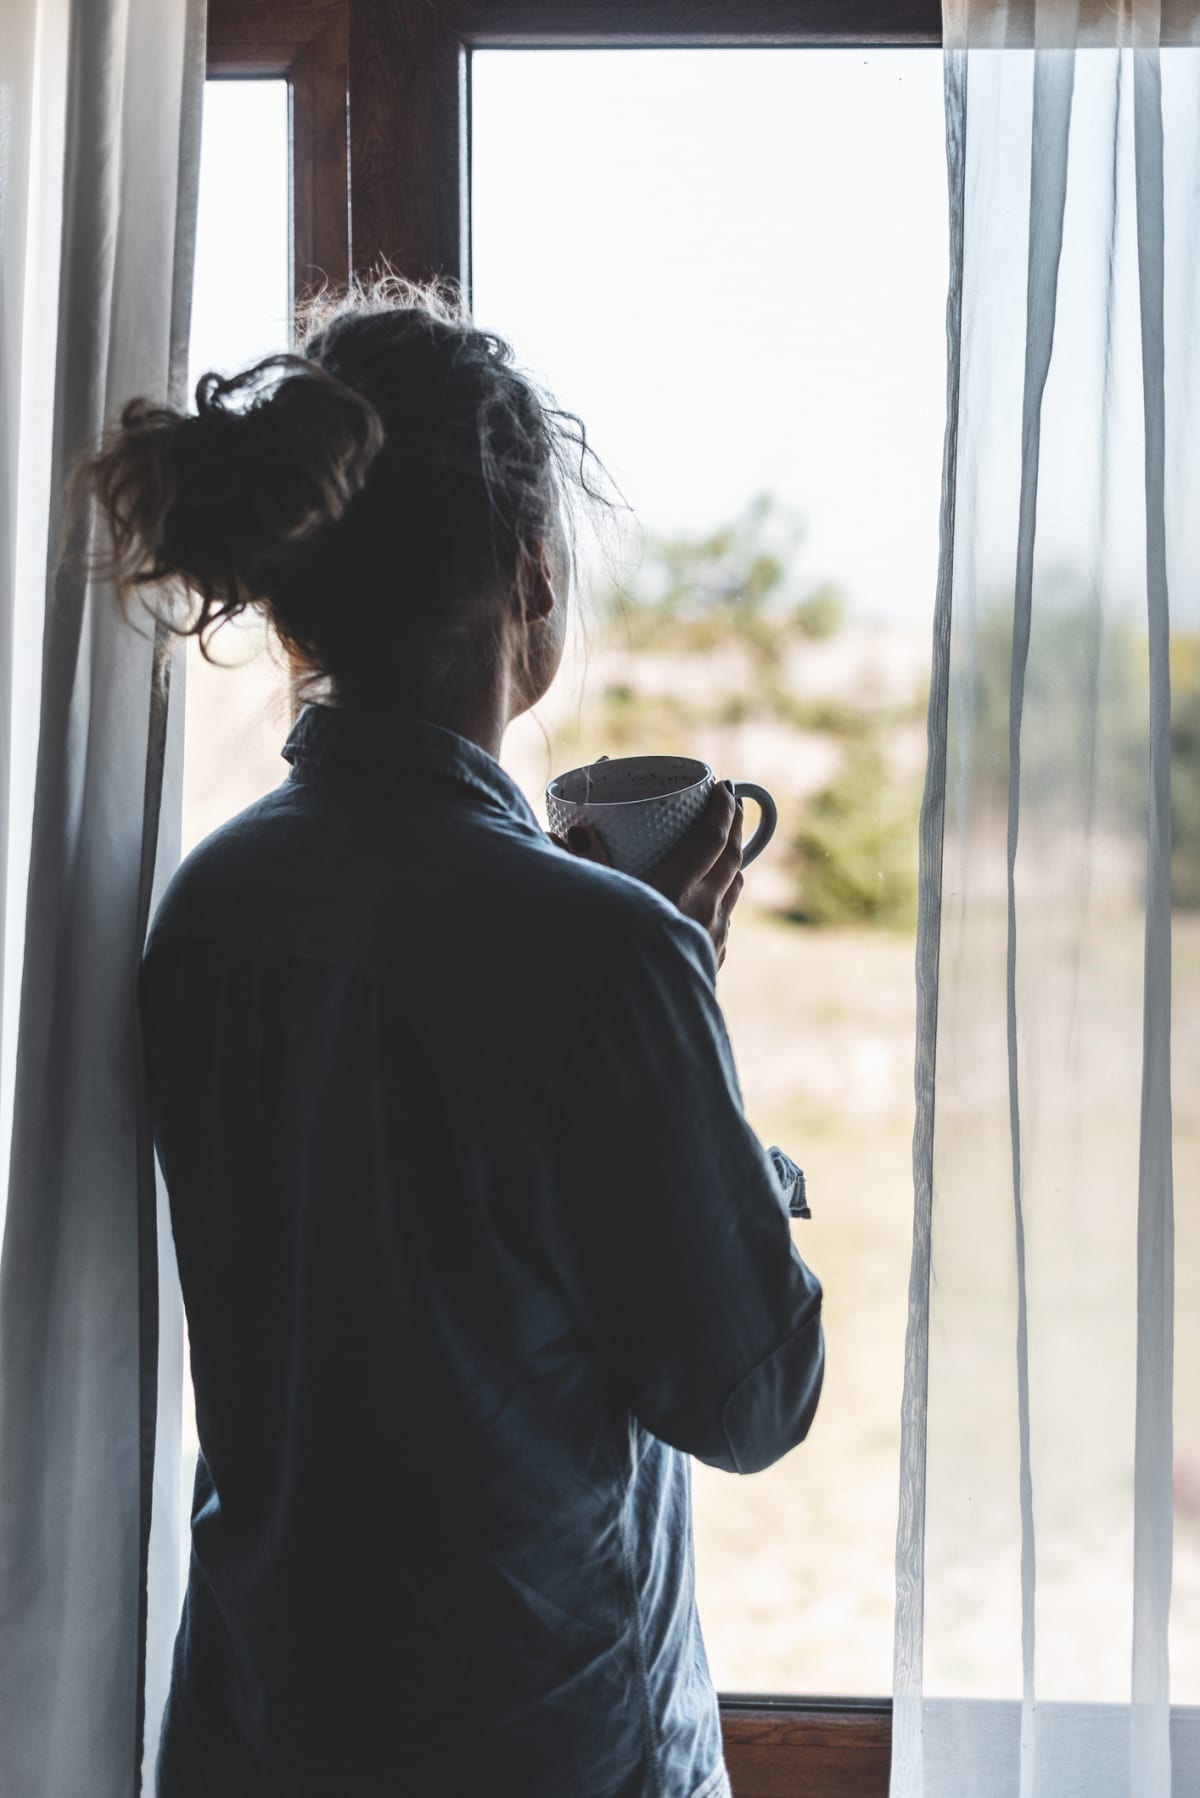 Silhouette of a woman drinking coffee next to the window